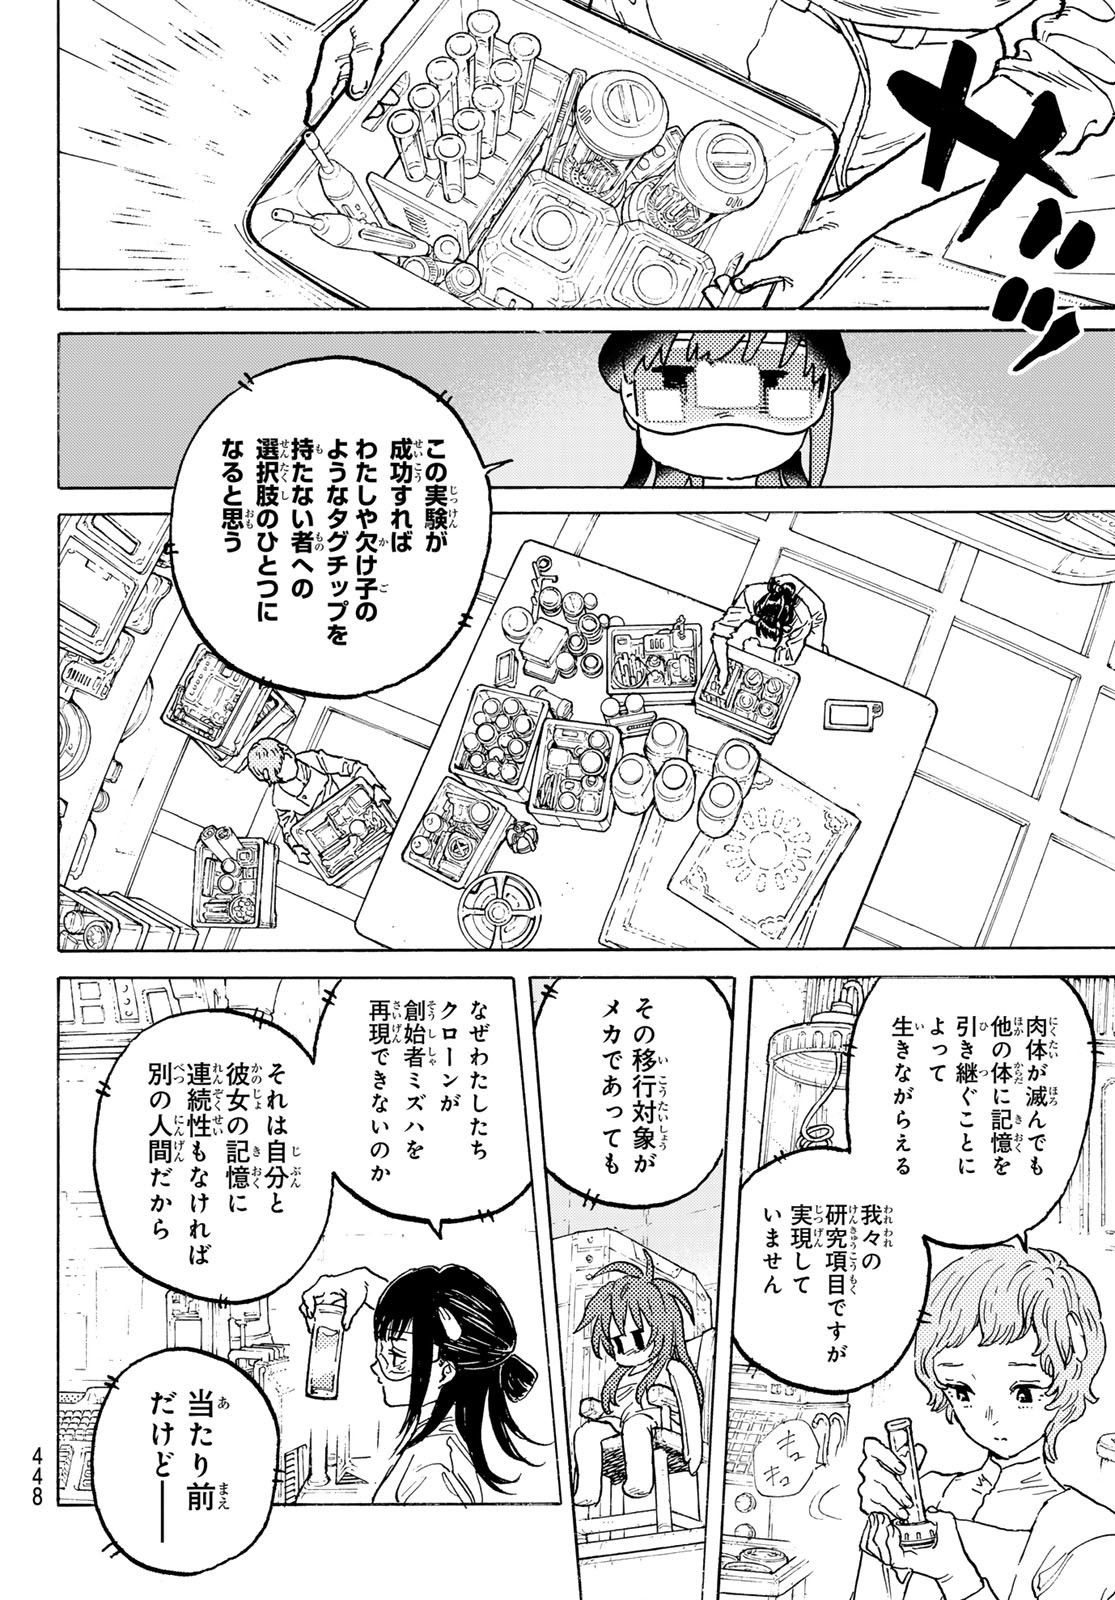 Weekly Shōnen Magazine - 週刊少年マガジン - Chapter 2024-33 - Page 446